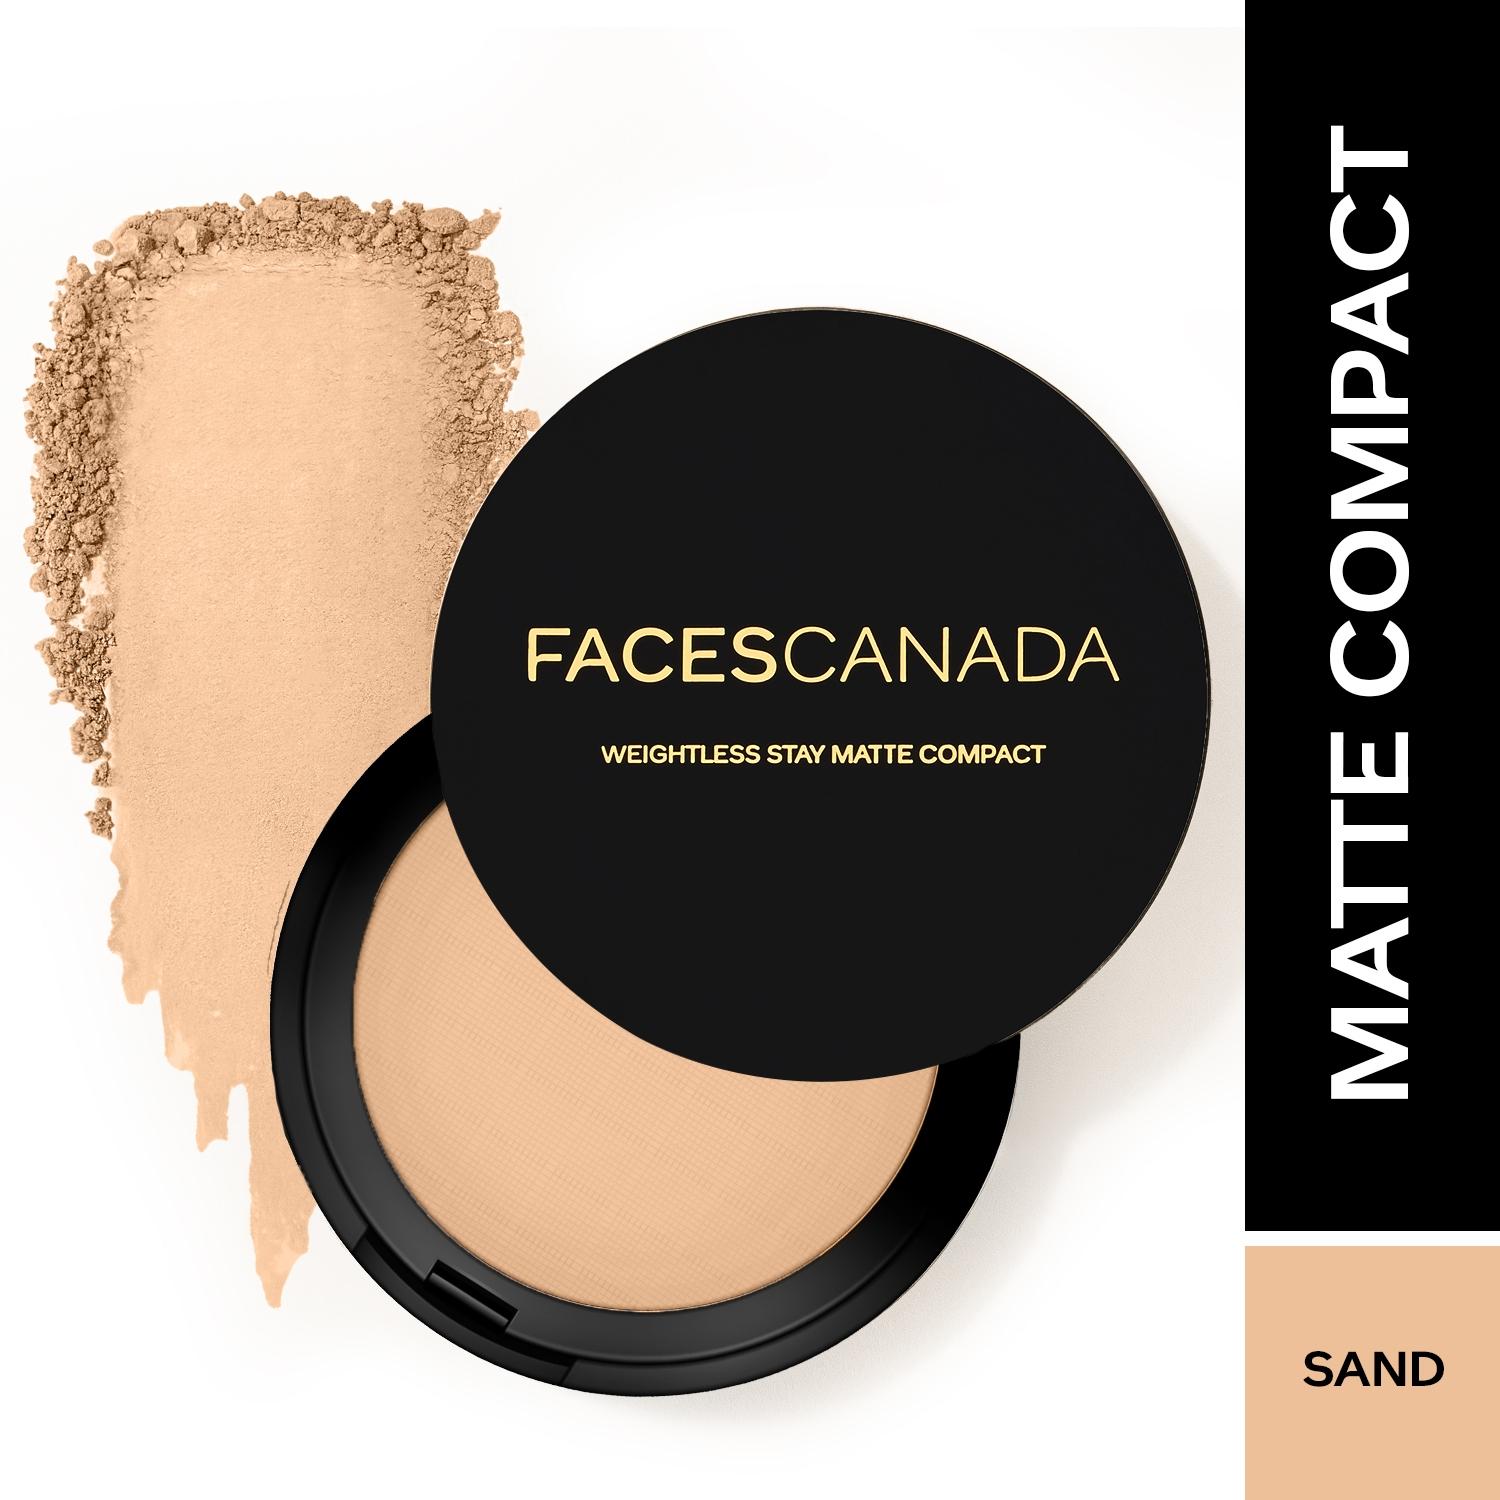 faces-canada-weightless-stay-matte-compact-spf-20---04-sand-(9g)